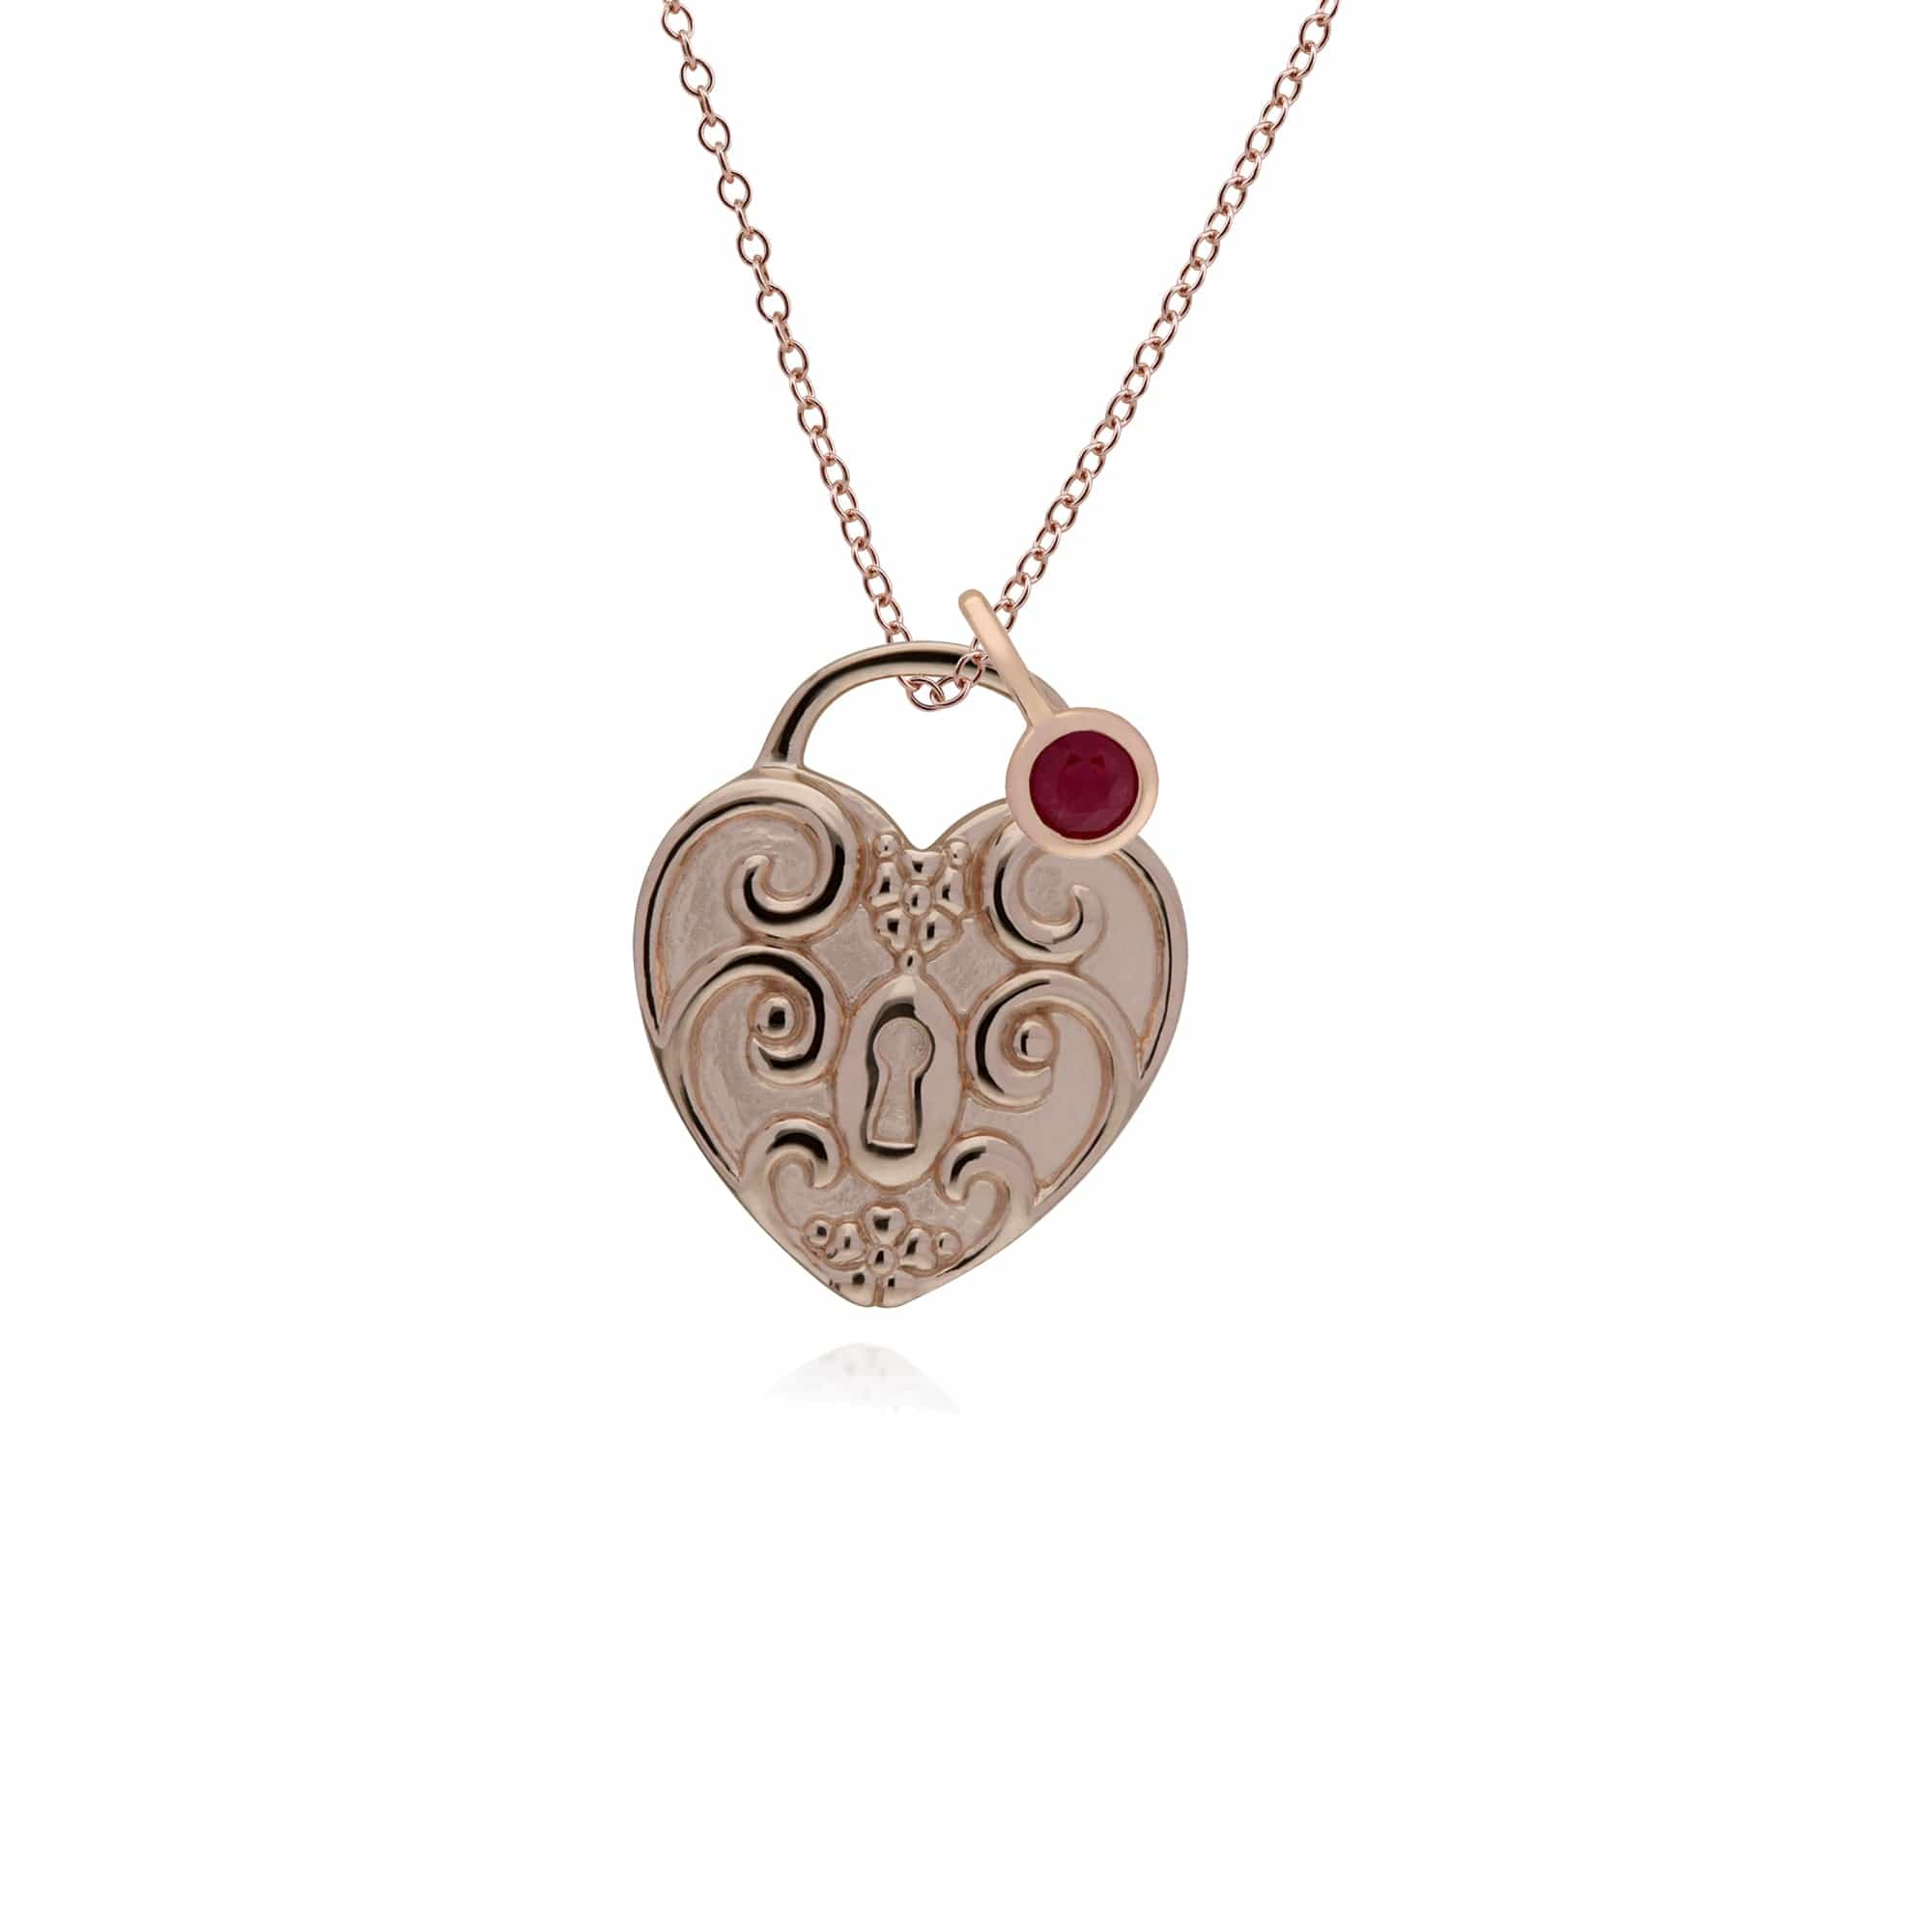 270P027309925-270P026501925 Classic Swirl Heart Lock Pendant & Ruby Charm in Rose Gold Plated 925 Sterling Silver 1